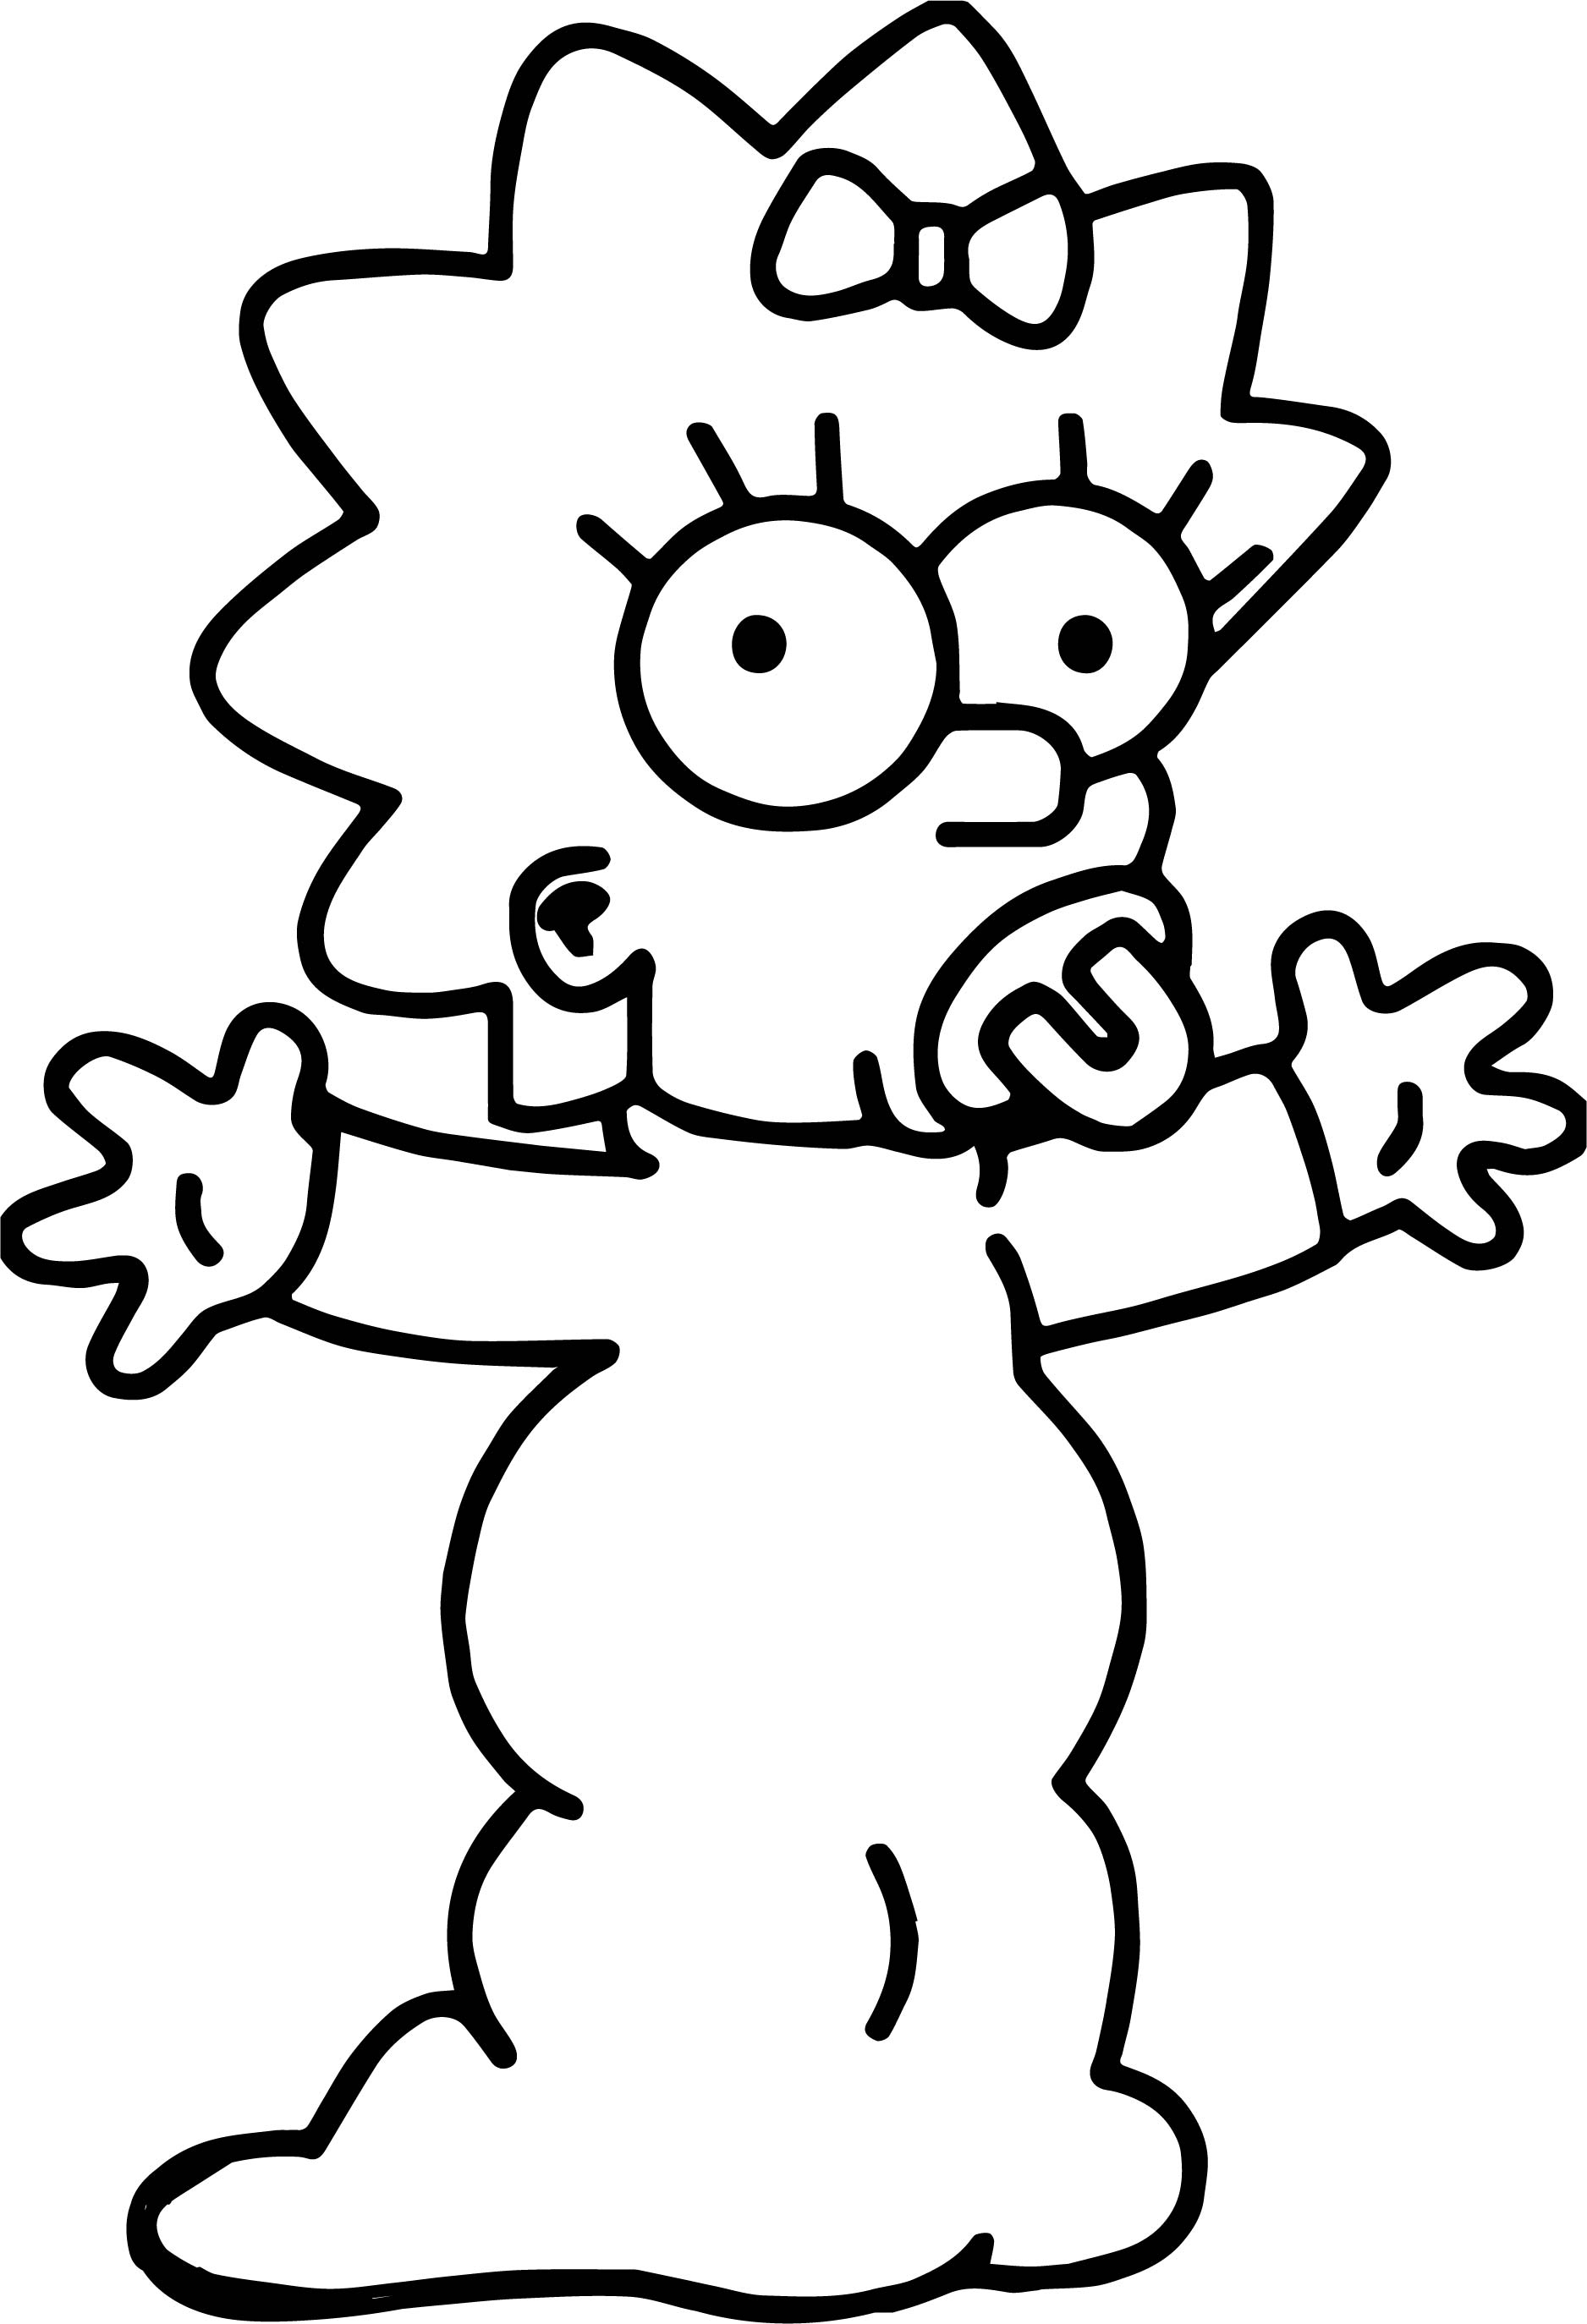 Free Maggie Simpson The Simpsons Coloring Page